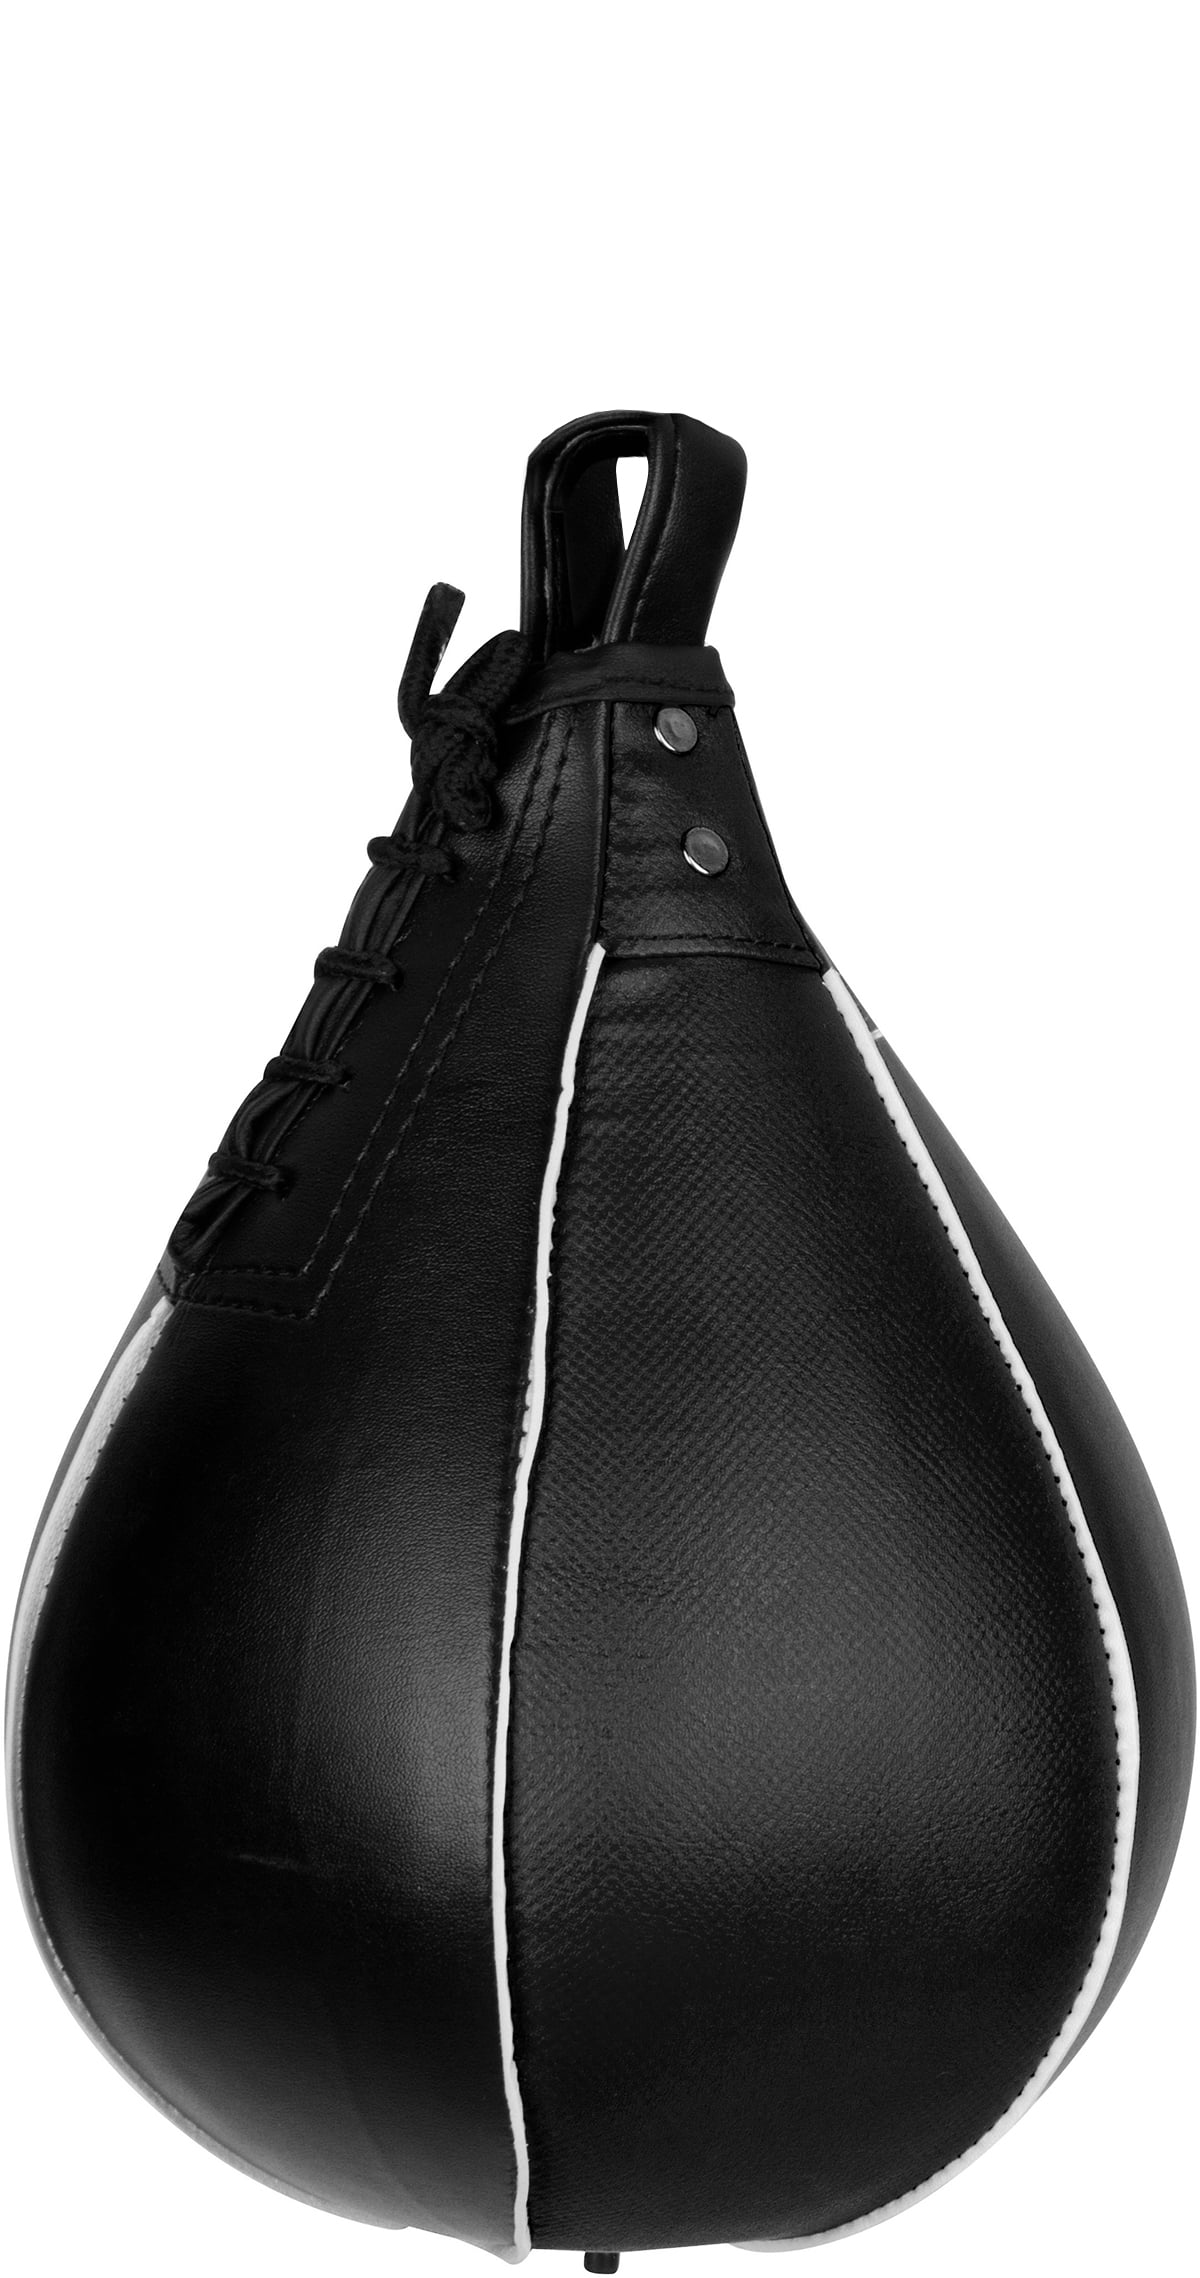 Boxing Speed Bag For Workout Training by Trademark Innovations - comicsahoy.com